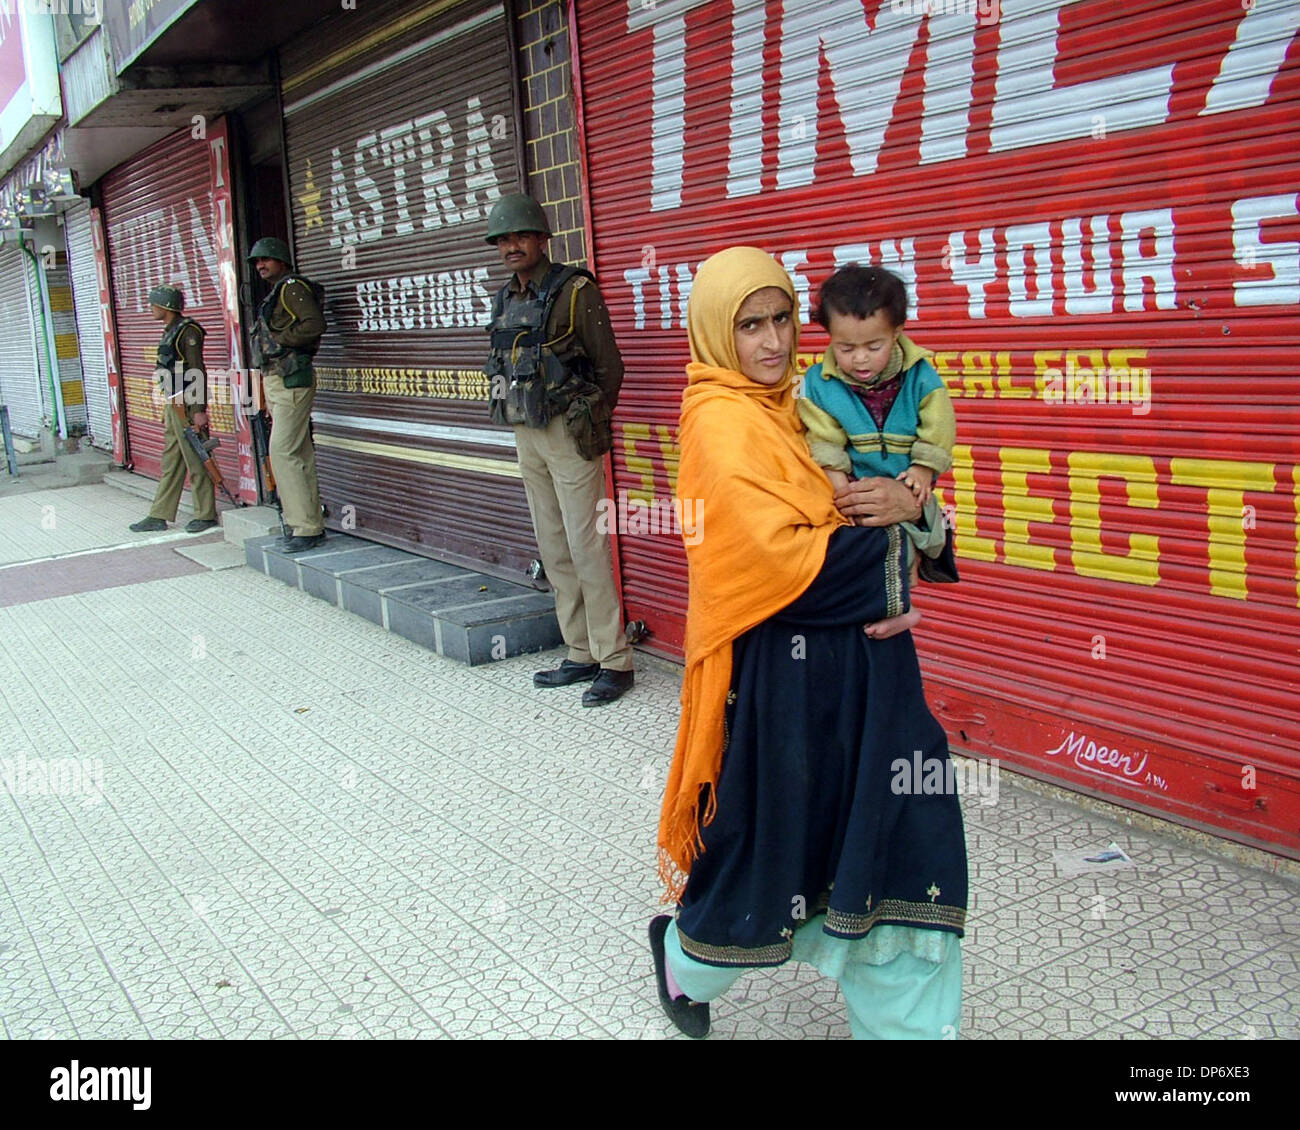 Oct 27, 2006; Srinagar, Kashmir, INDIA; A woman walks past soldiers in Srinagar as seperatists of Srinagar call for a general strike to mark India's Infantry Day. On Oct 27th,1947 the first batch of Indian army came to Kashmir to fight against Pakistan soldiers. Mandatory Credit: Photo by Altaf Zargar/ZUMA Press. (©) Copyright 2006 by Altaf Zargar Stock Photo